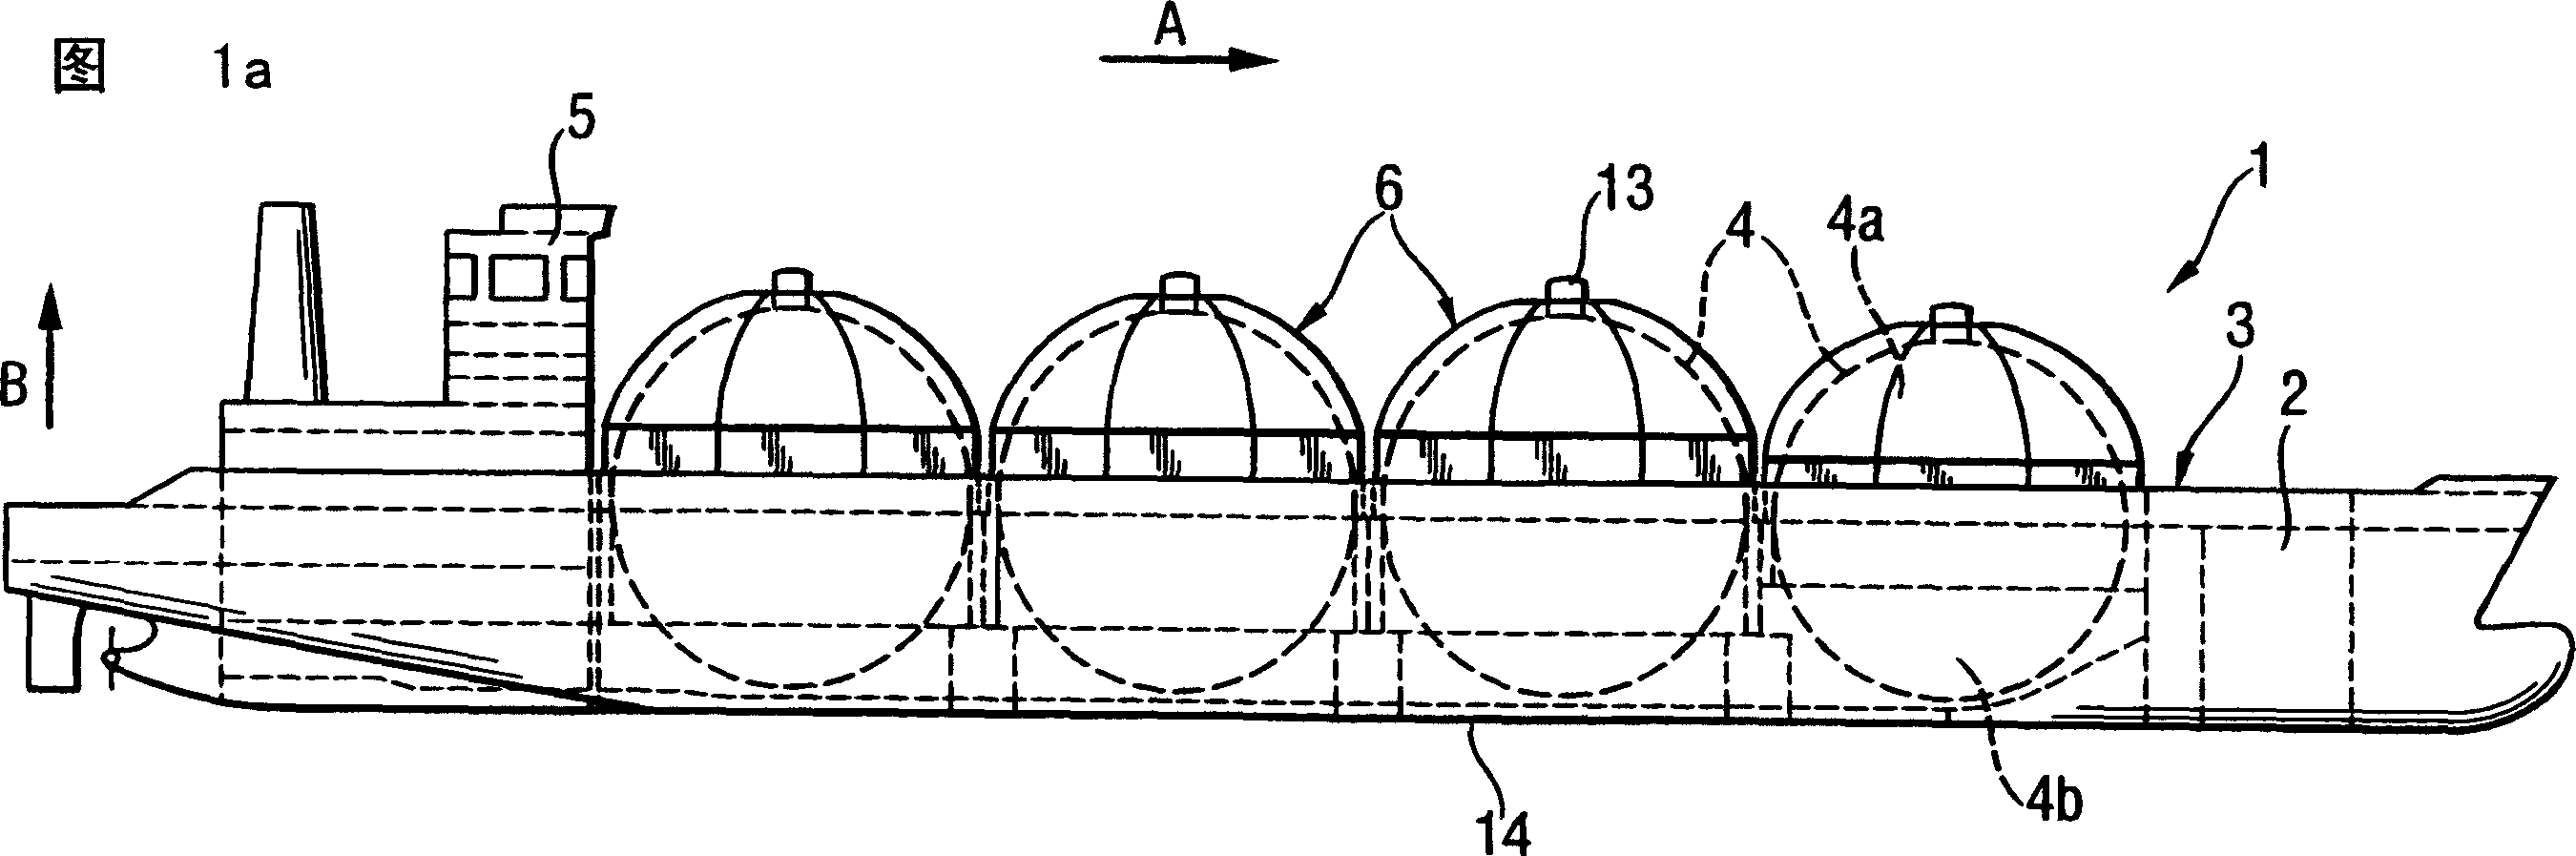 A method and an arrangement for reducing the weight and optimizing the longitudinal strength of a water-craft